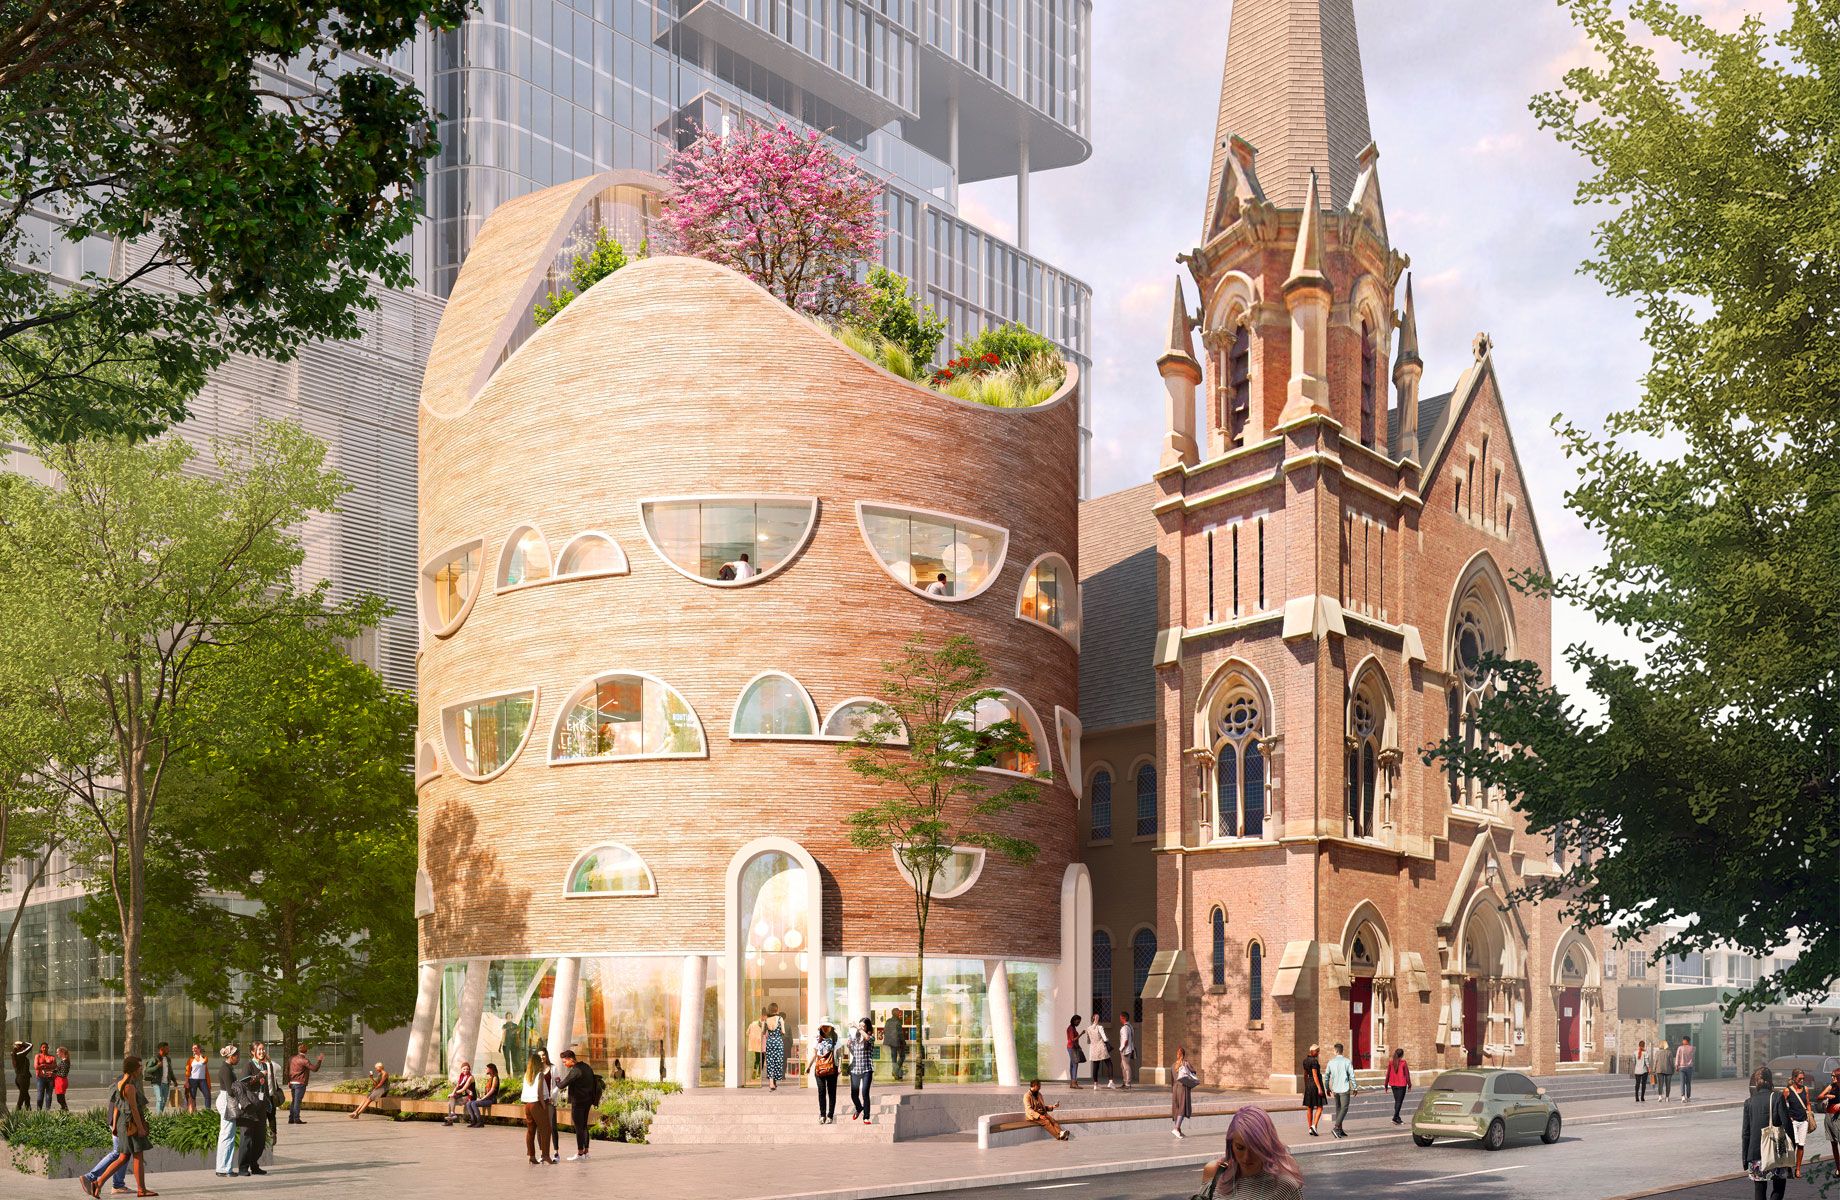 First Look at Design for Parramatta Square Community Centre